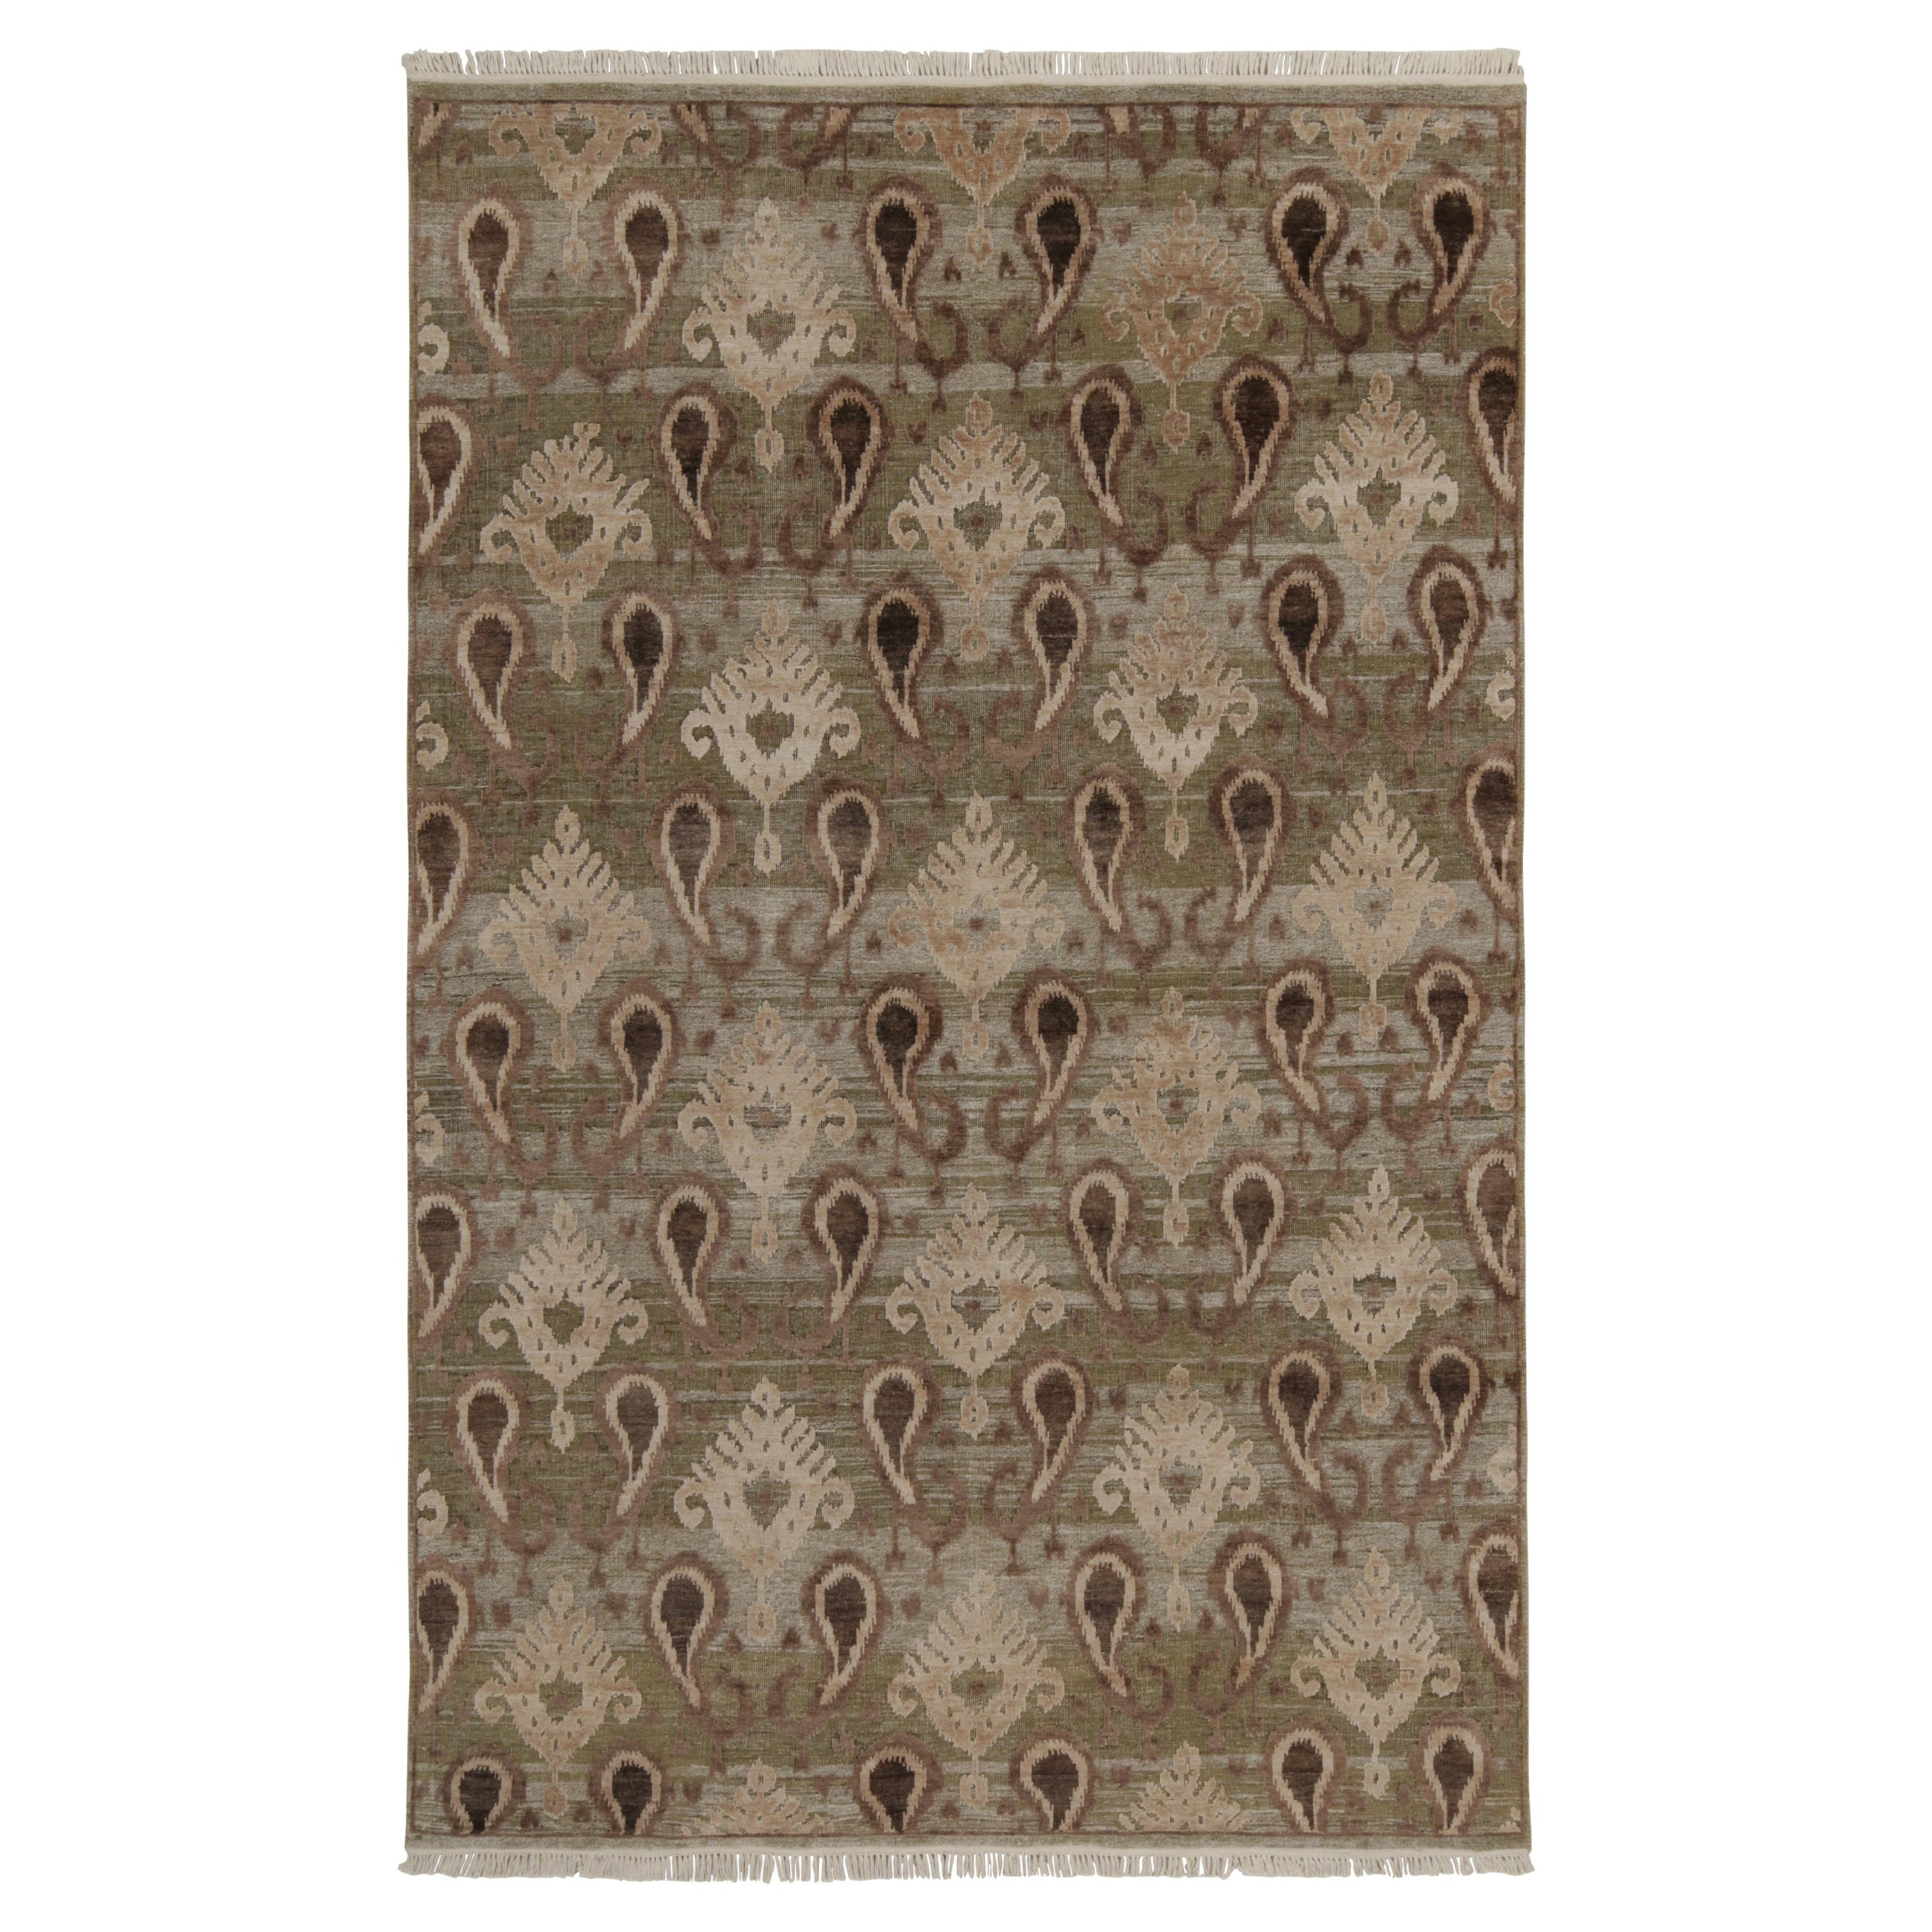 Rug & Kilim’s Ikats Style rug in Green with Beige-Brown Paisley Floral Patterns